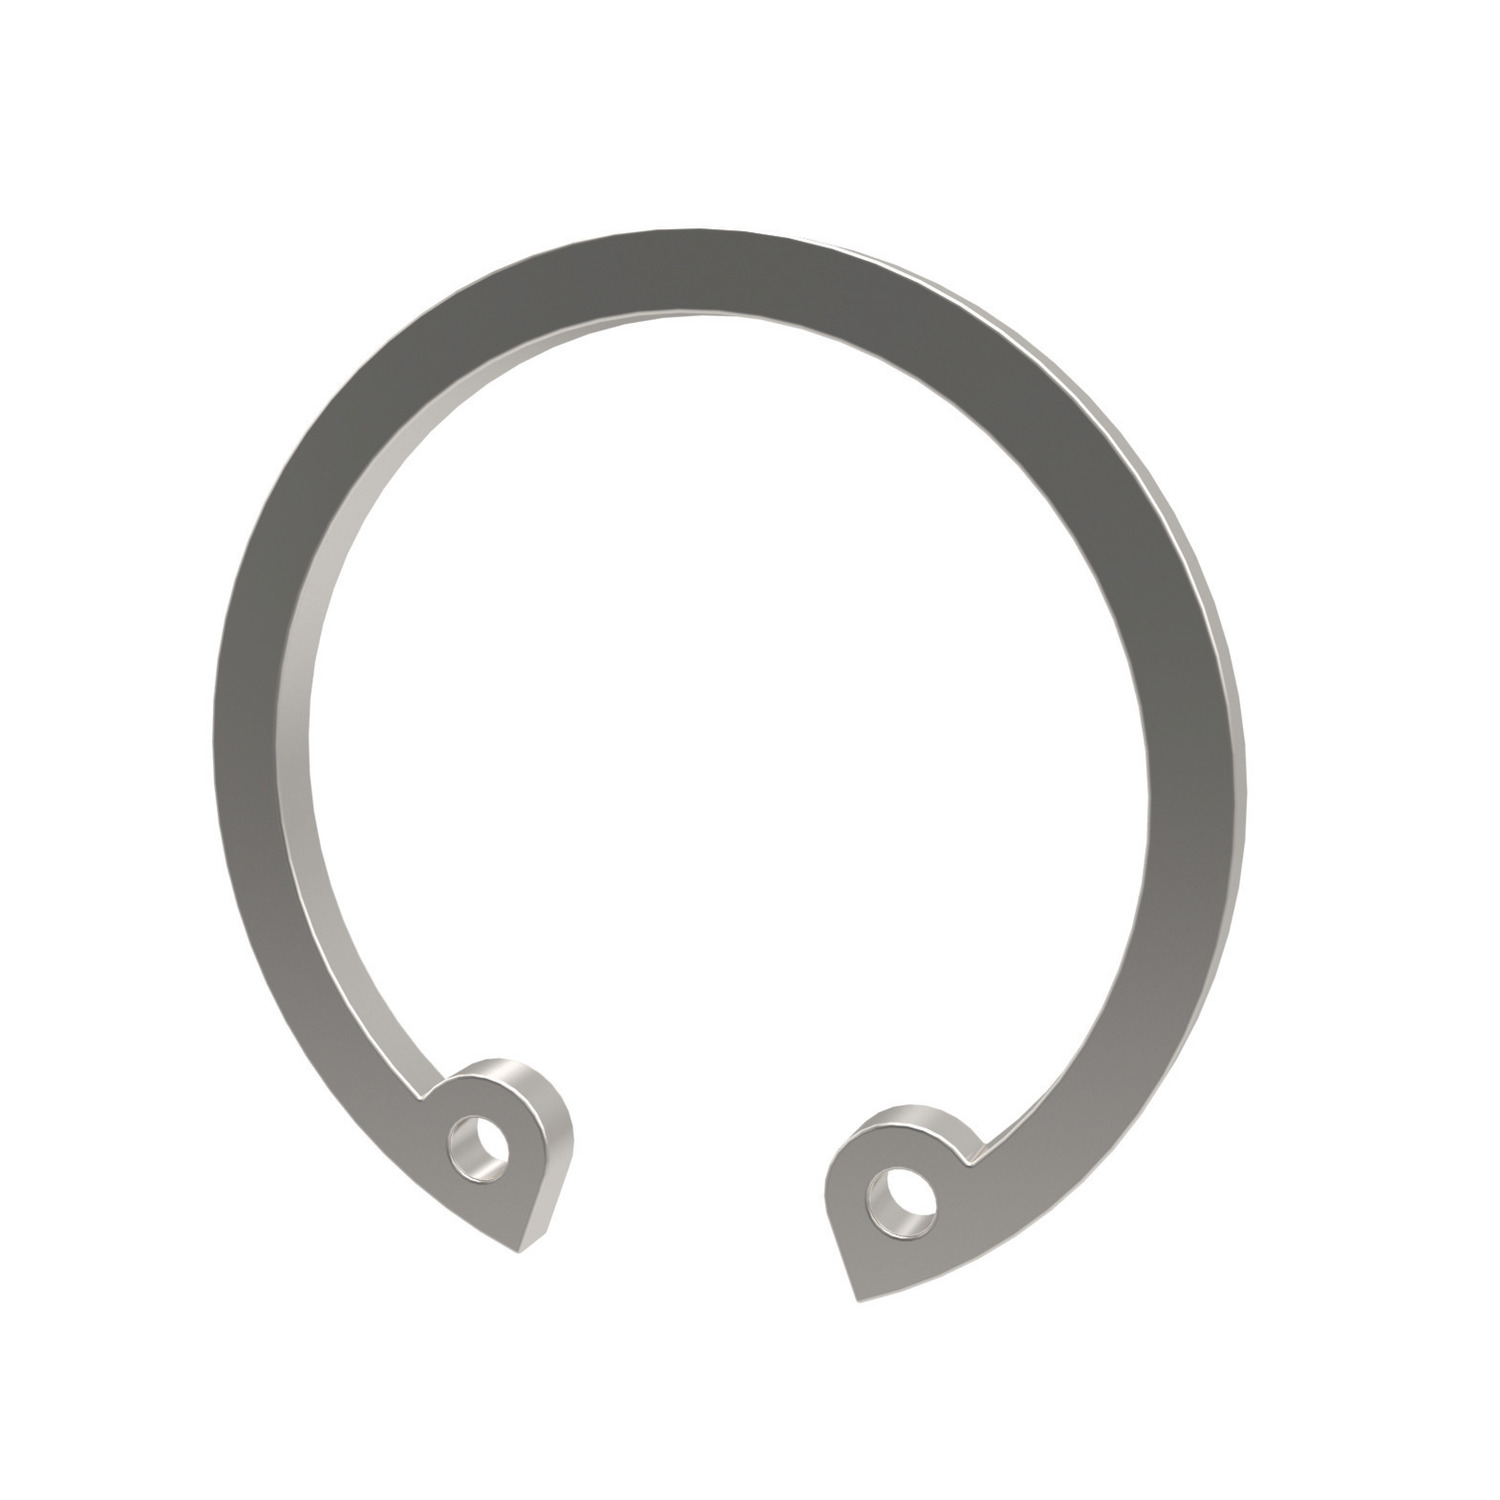 Product P0381.A2, Internal Circlips A2 stainless / 